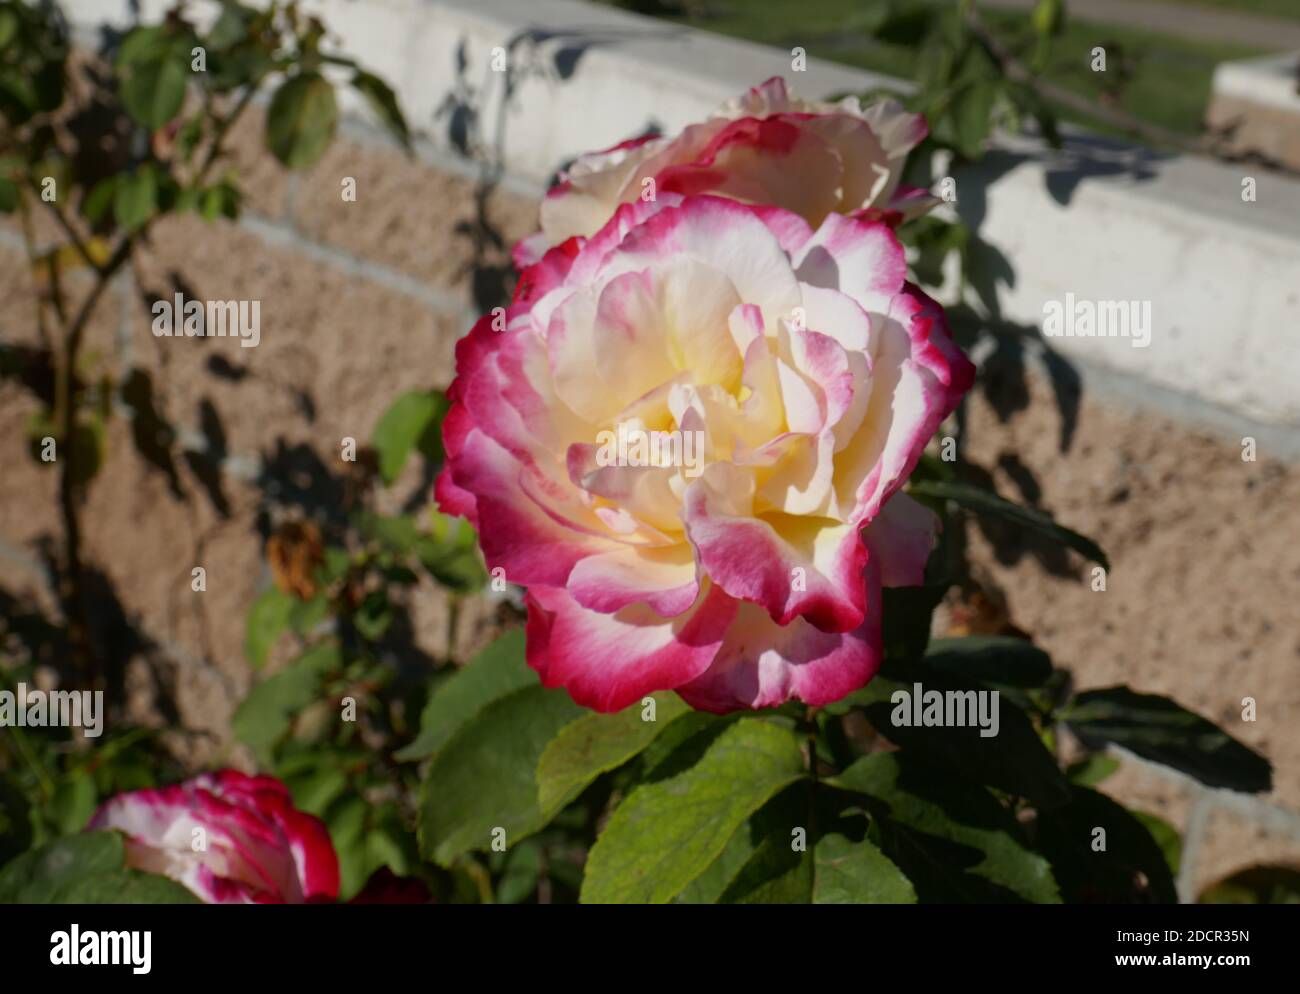 Los Angeles, California, USA 17th November 2020 A general view of atmosphere of rose at Mount Sinai Cemetery Hollywood Hills on November 17, 2020 in Los Angeles, California, USA. Photo by Barry King/Alamy Stock Photo Stock Photo